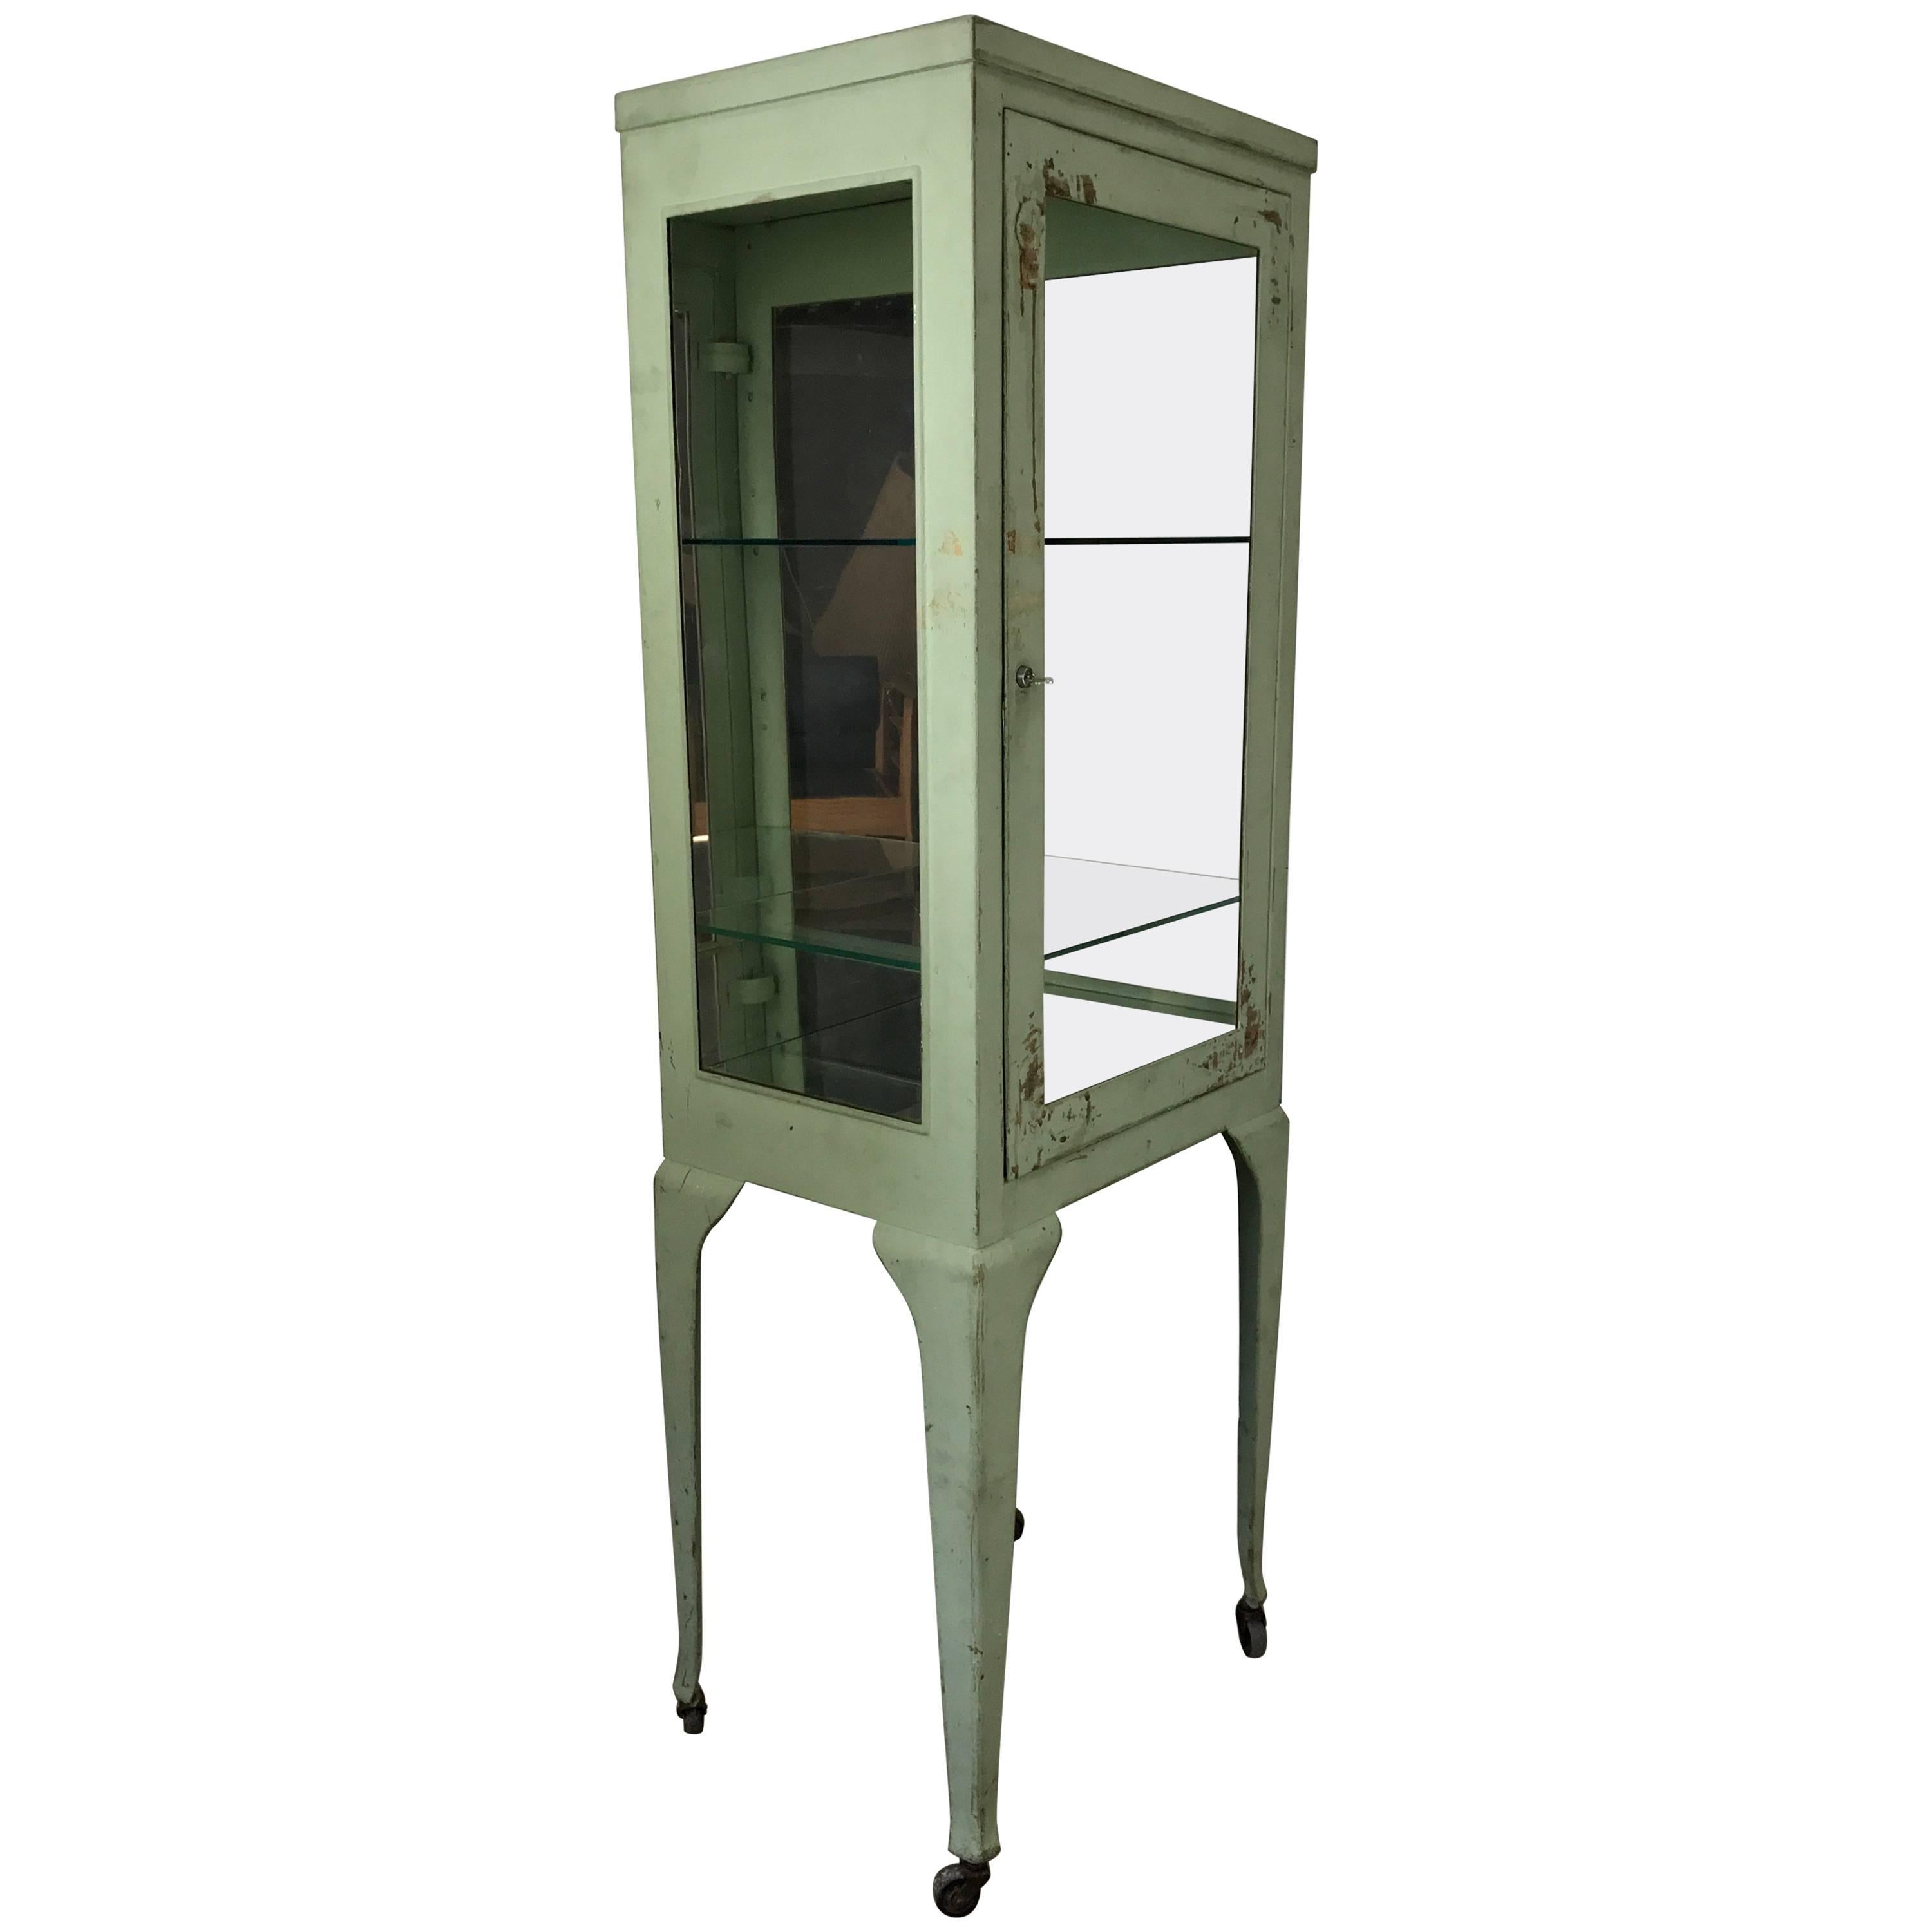 Classic 1920s Metal and Glass Specimen Cabinet, Medical, Industrial